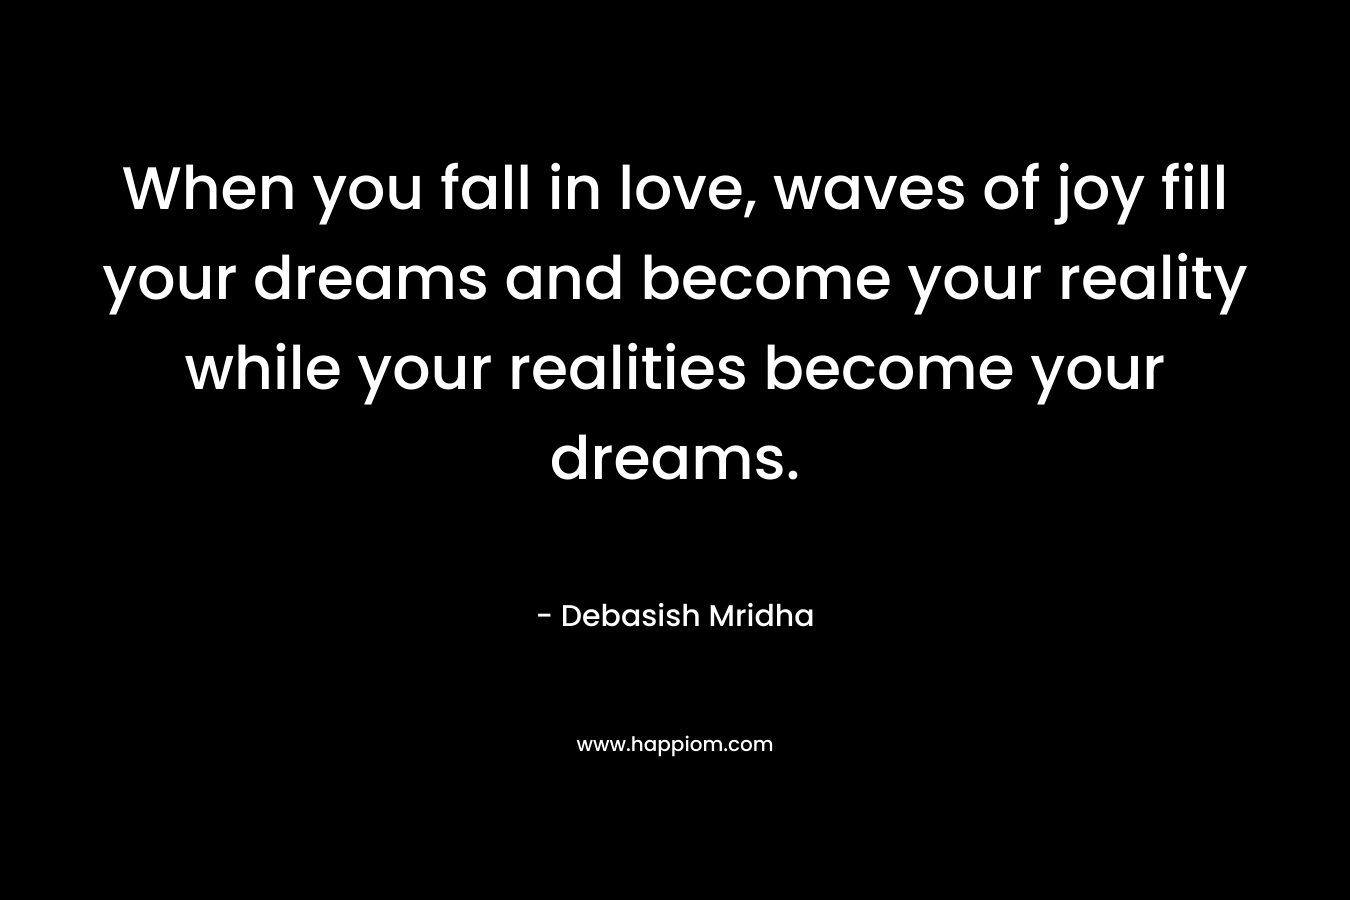 When you fall in love, waves of joy fill your dreams and become your reality while your realities become your dreams.